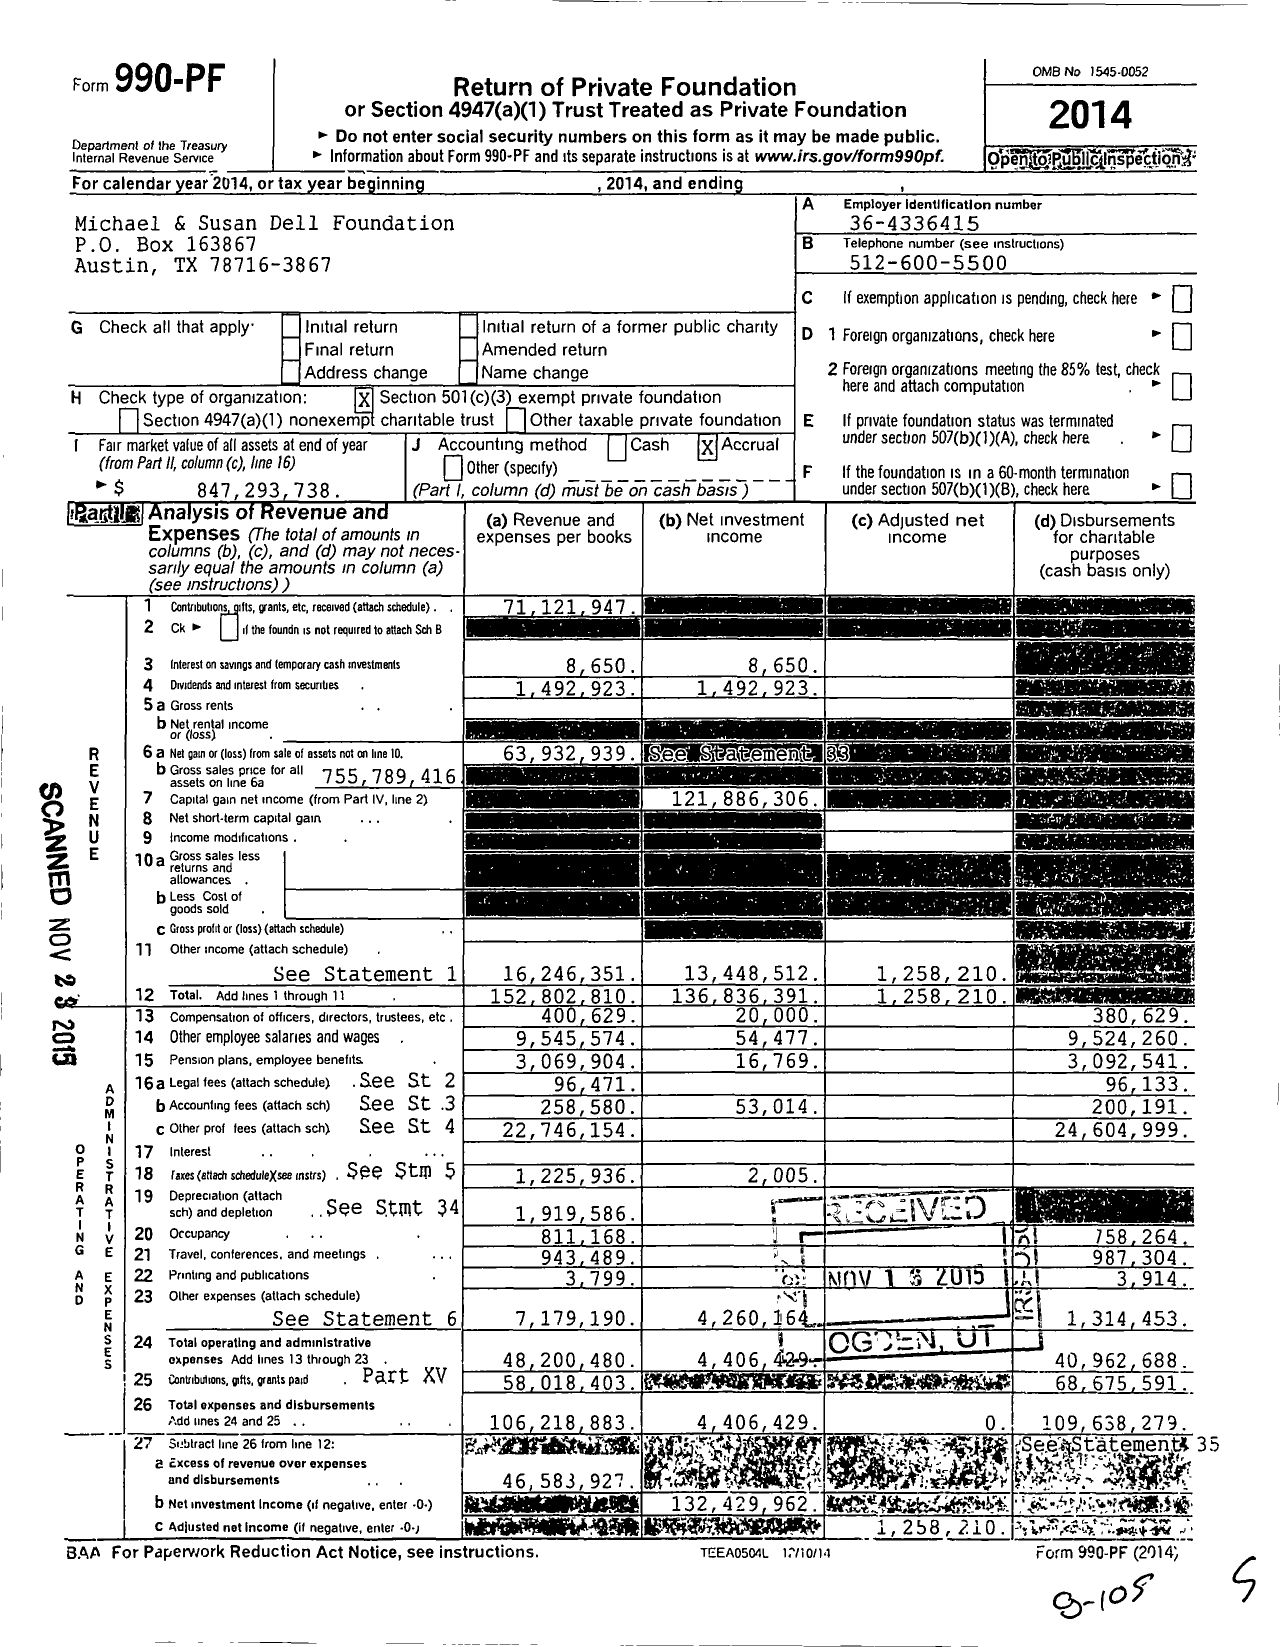 Image of first page of 2014 Form 990PF for Michael and Susan Dell Foundation (MSDF)